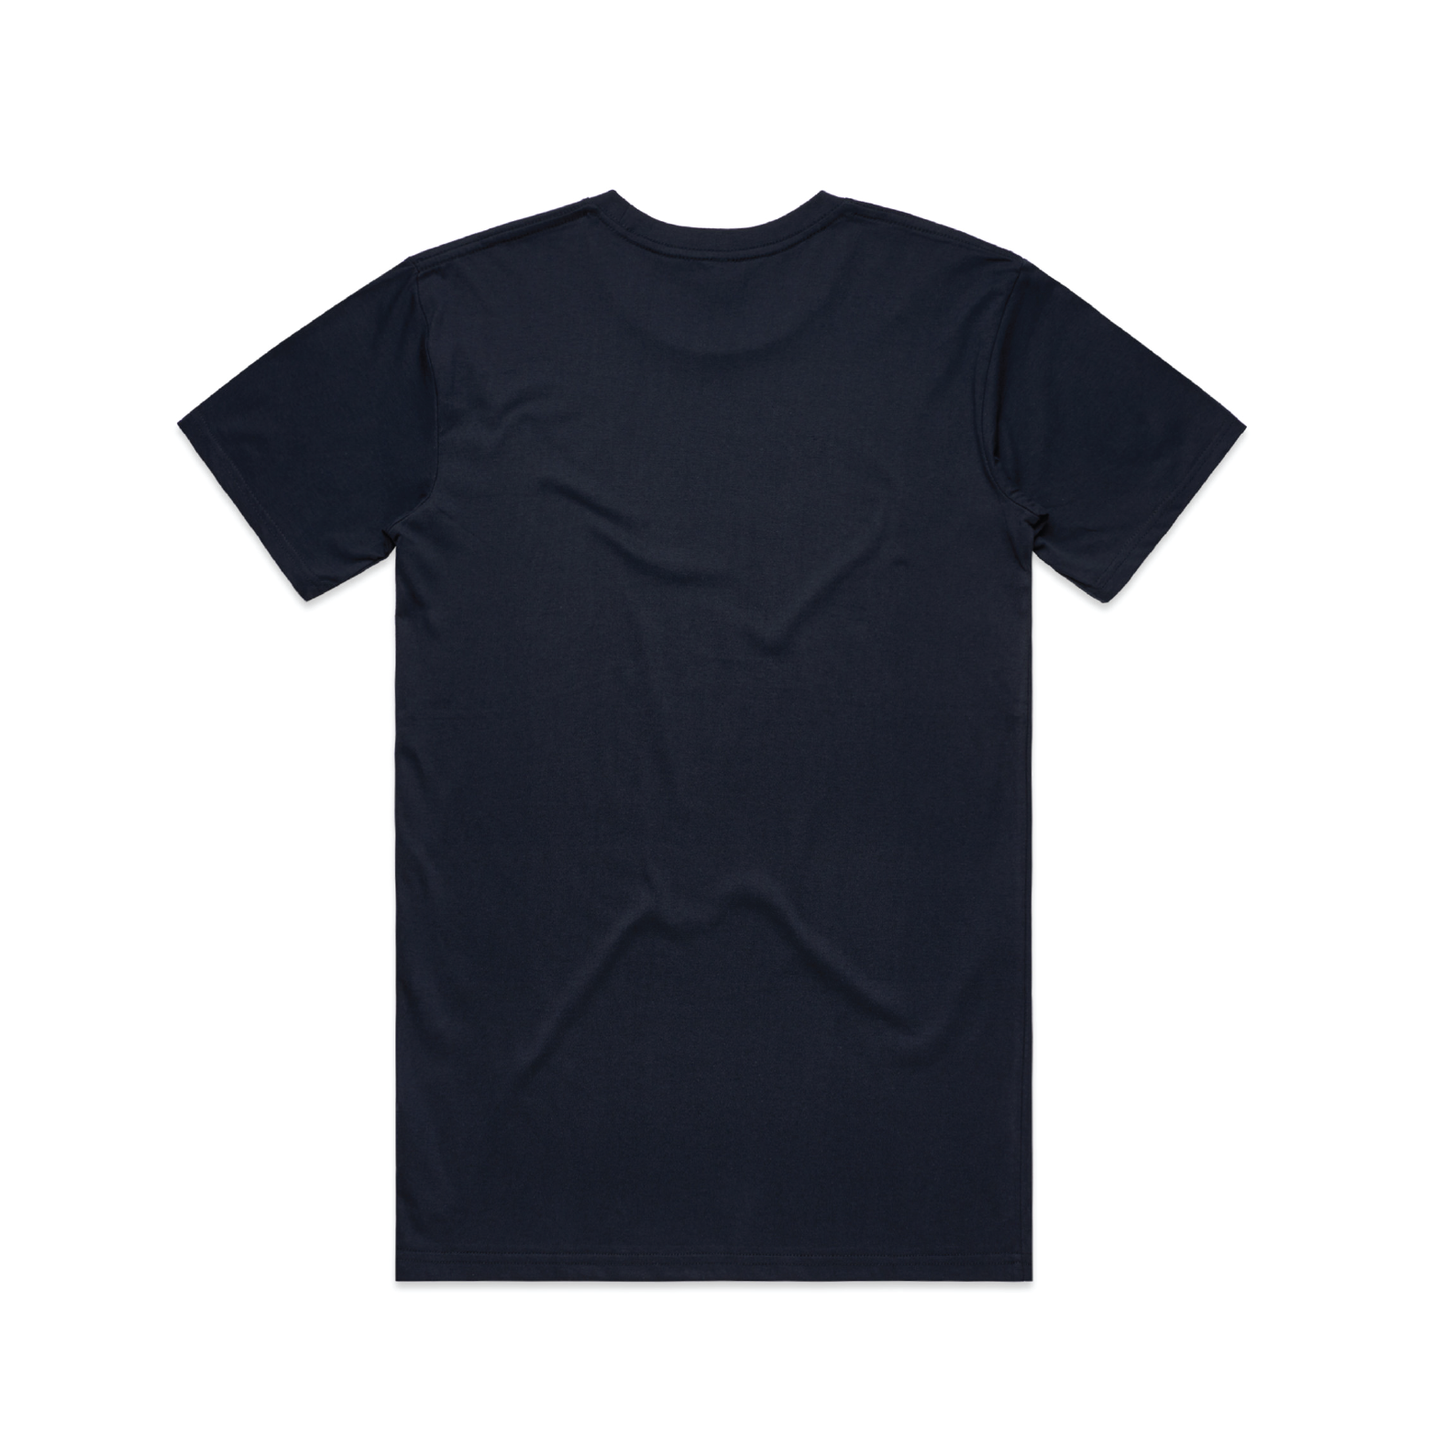 NORWOOD FLAMES - CLUB LOGO FRONT TEE NAVY